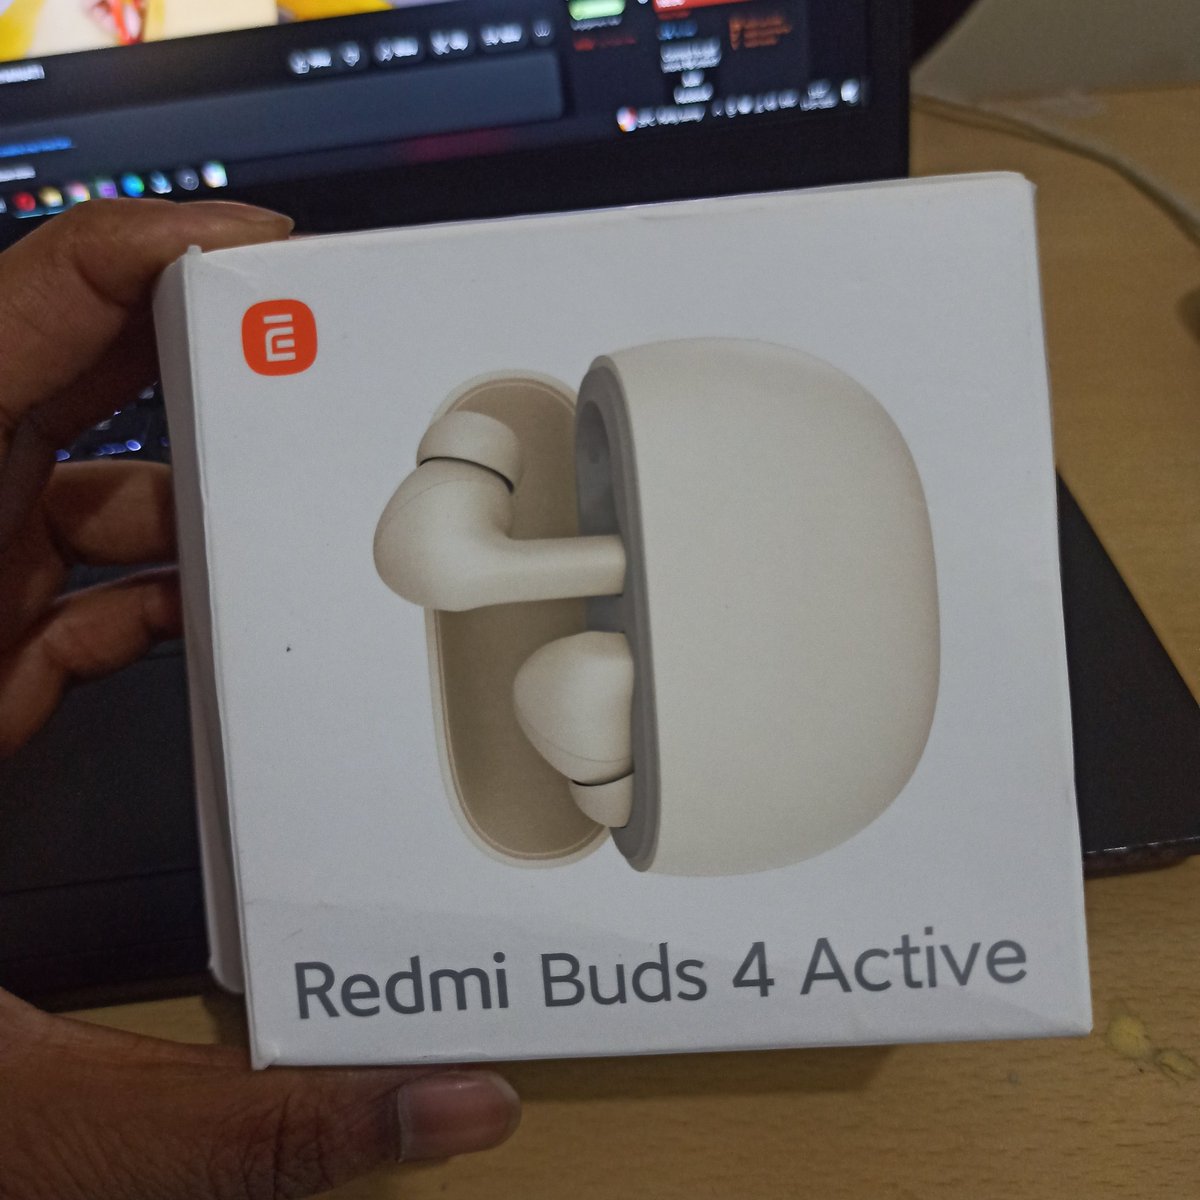 Are you excited? Redmi Buds 4 Active  is here
Comment your question & I will cover into next review video 

#RedmiTWS   #Tws #GamingTWS #RedmiBuds4